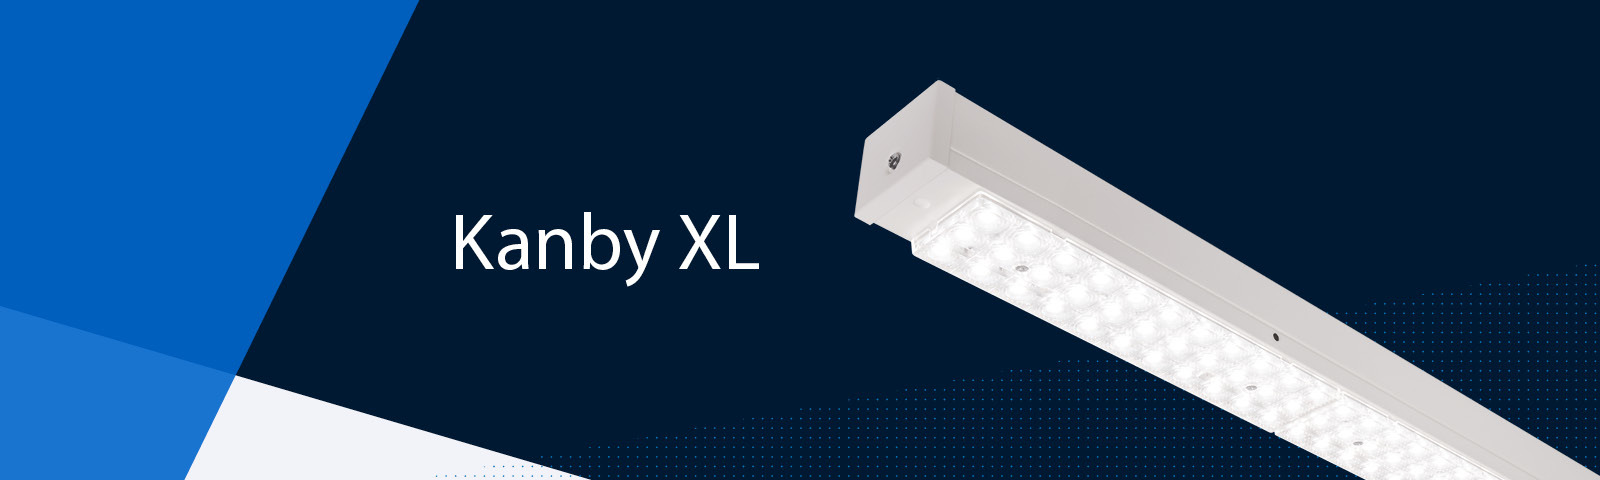 Kanby XL - High Performance, Low Glare Lighting for Industry